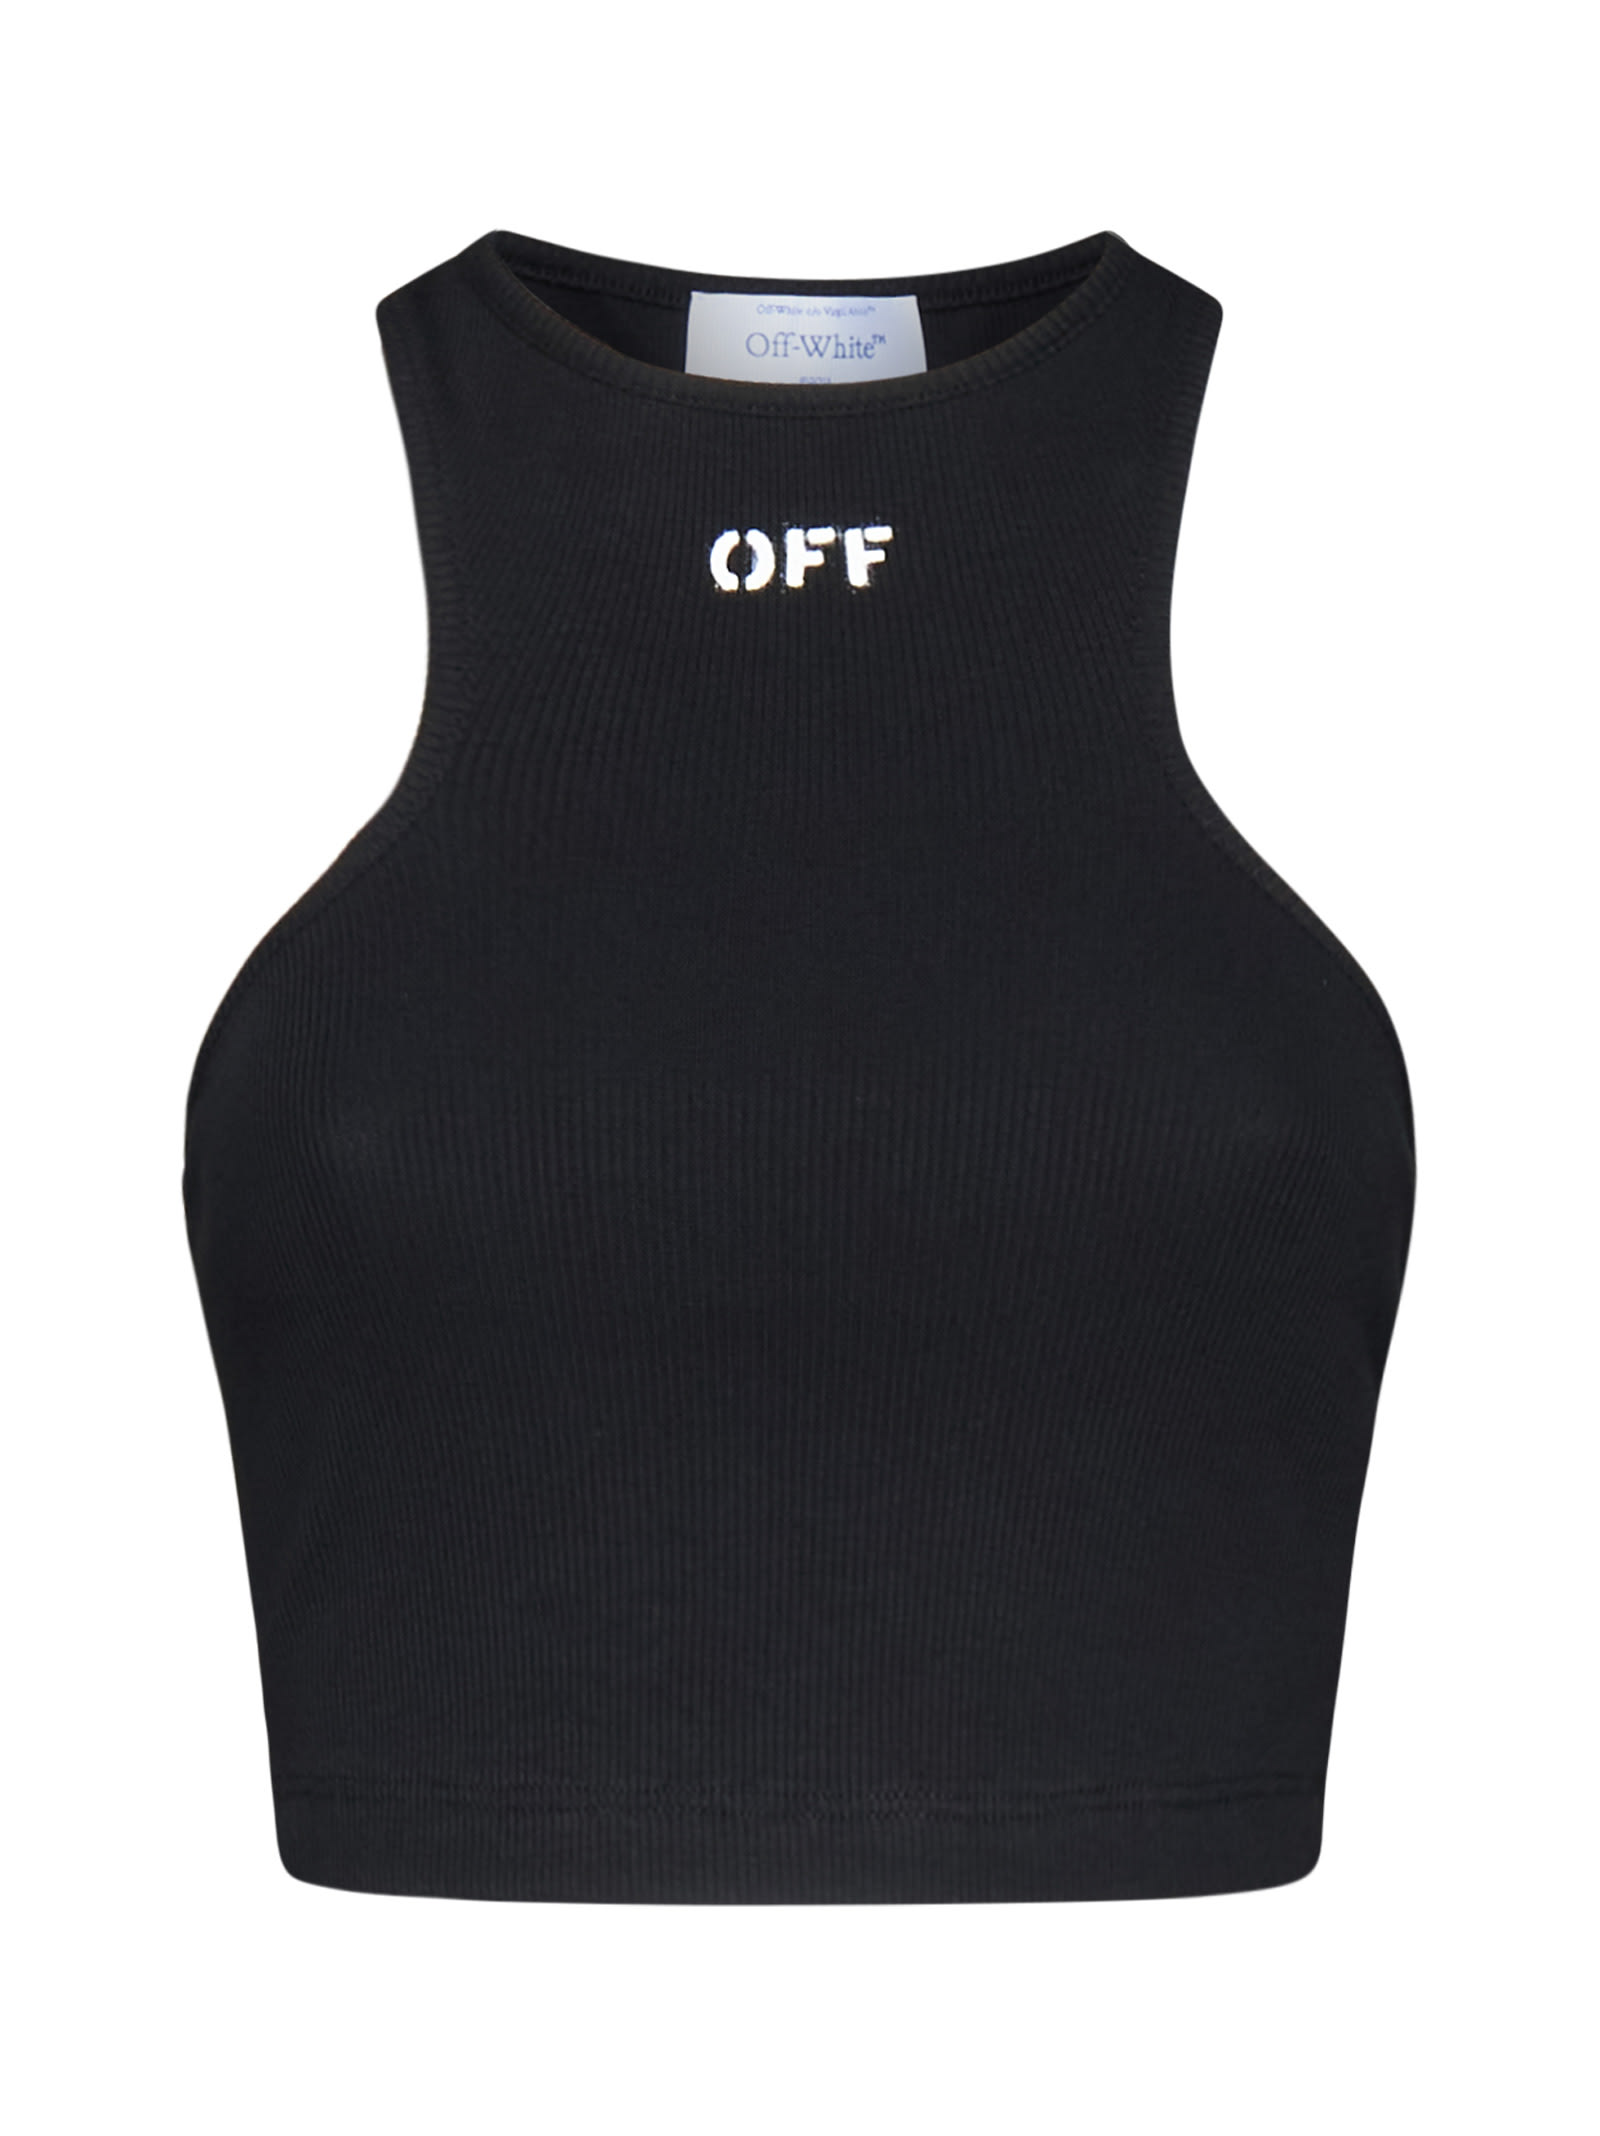 OFF-WHITE OWAD086F23JER001 1001